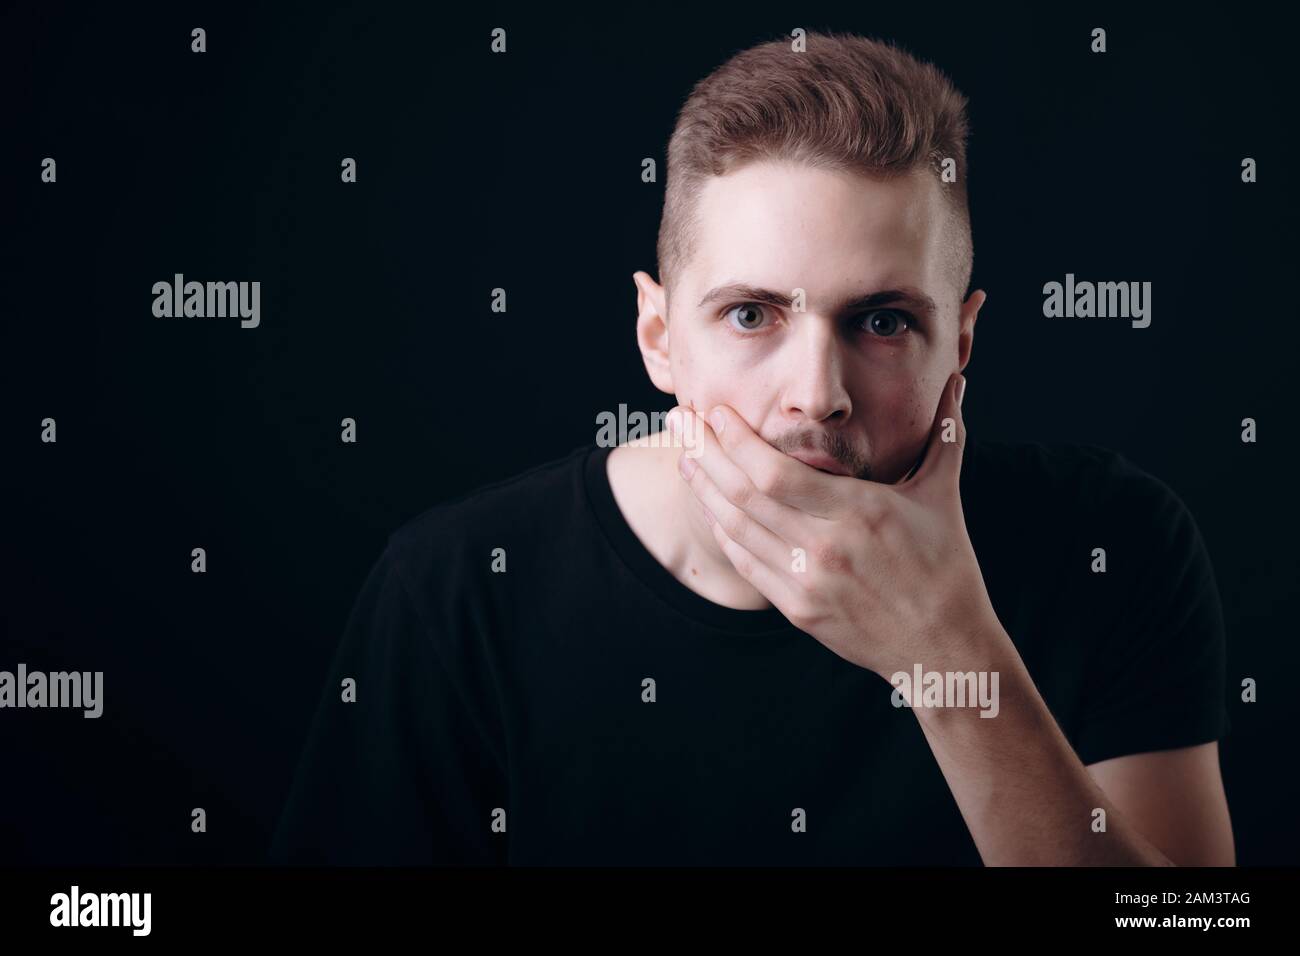 Astonished Young Man Covering His Mouth With Hand Stock Photo